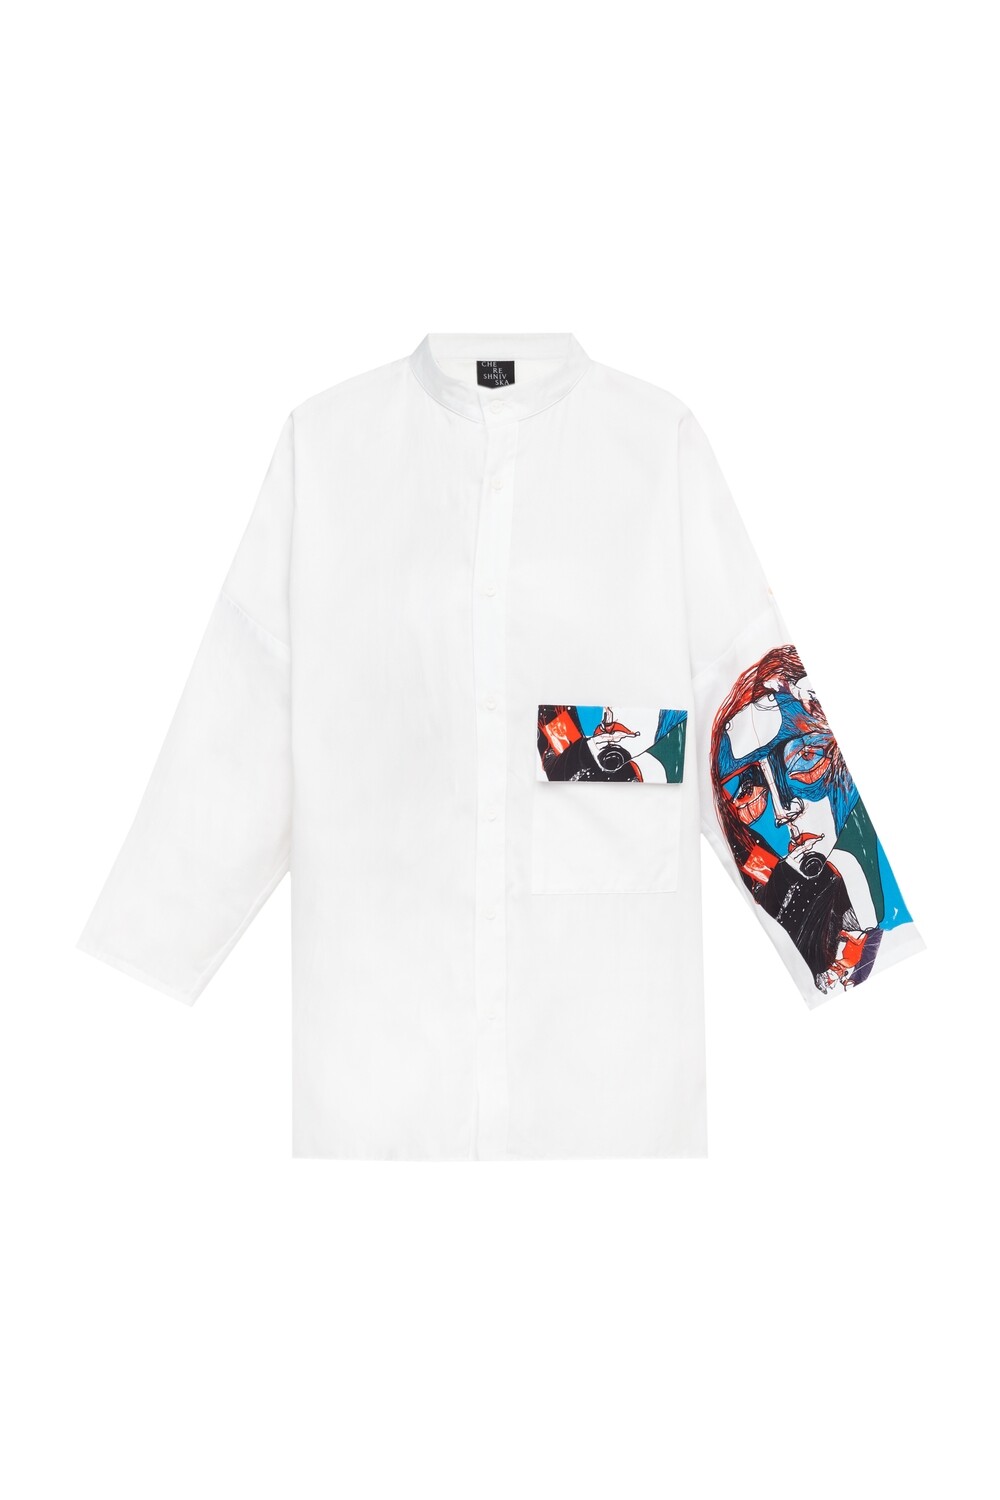 White oversize shirt with a printed sleeve